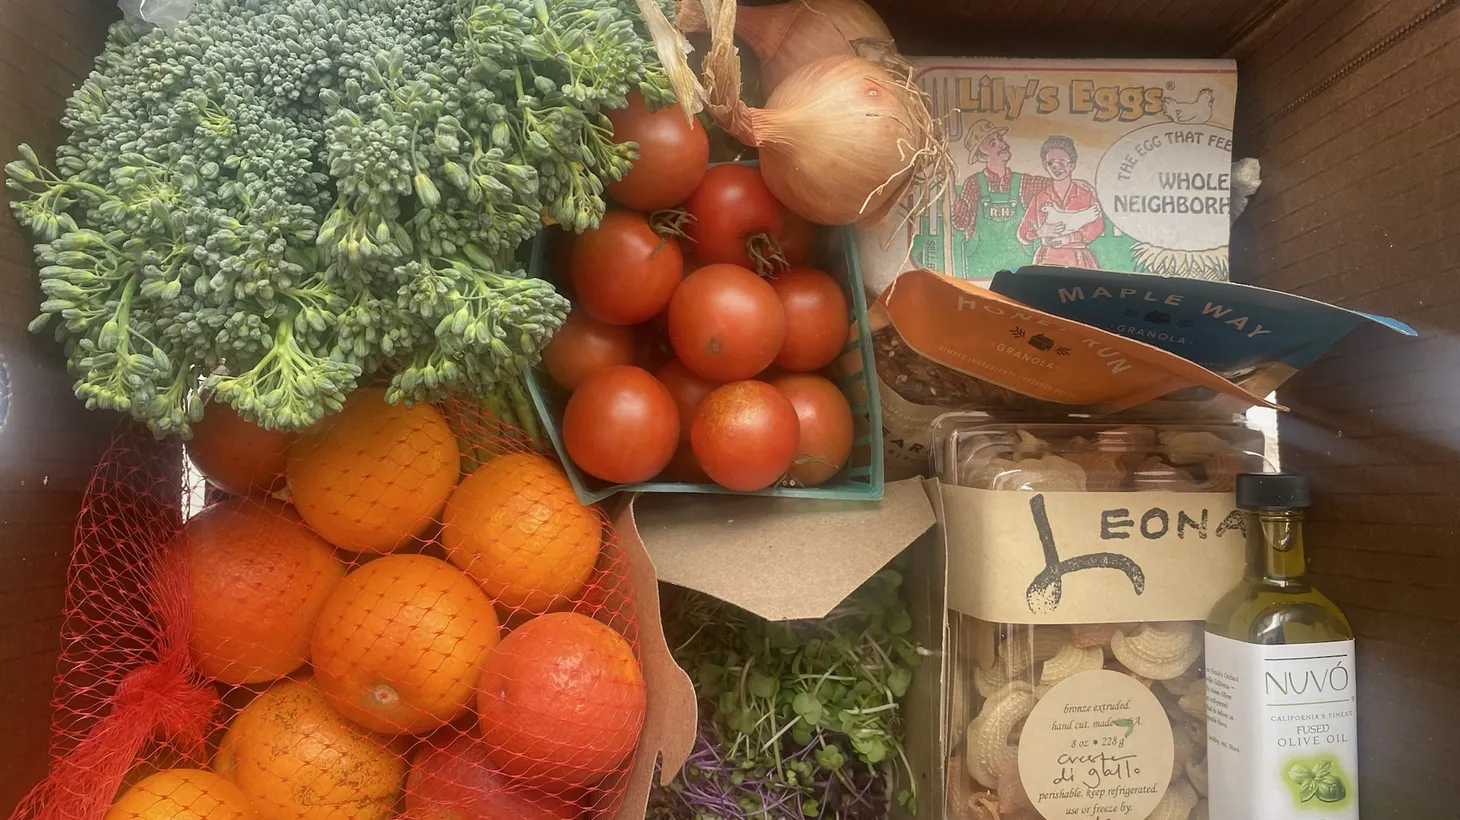 Order online from five different LA farmers' markets and get produce delivered to your door courtesy of Food Access’s eat! program.